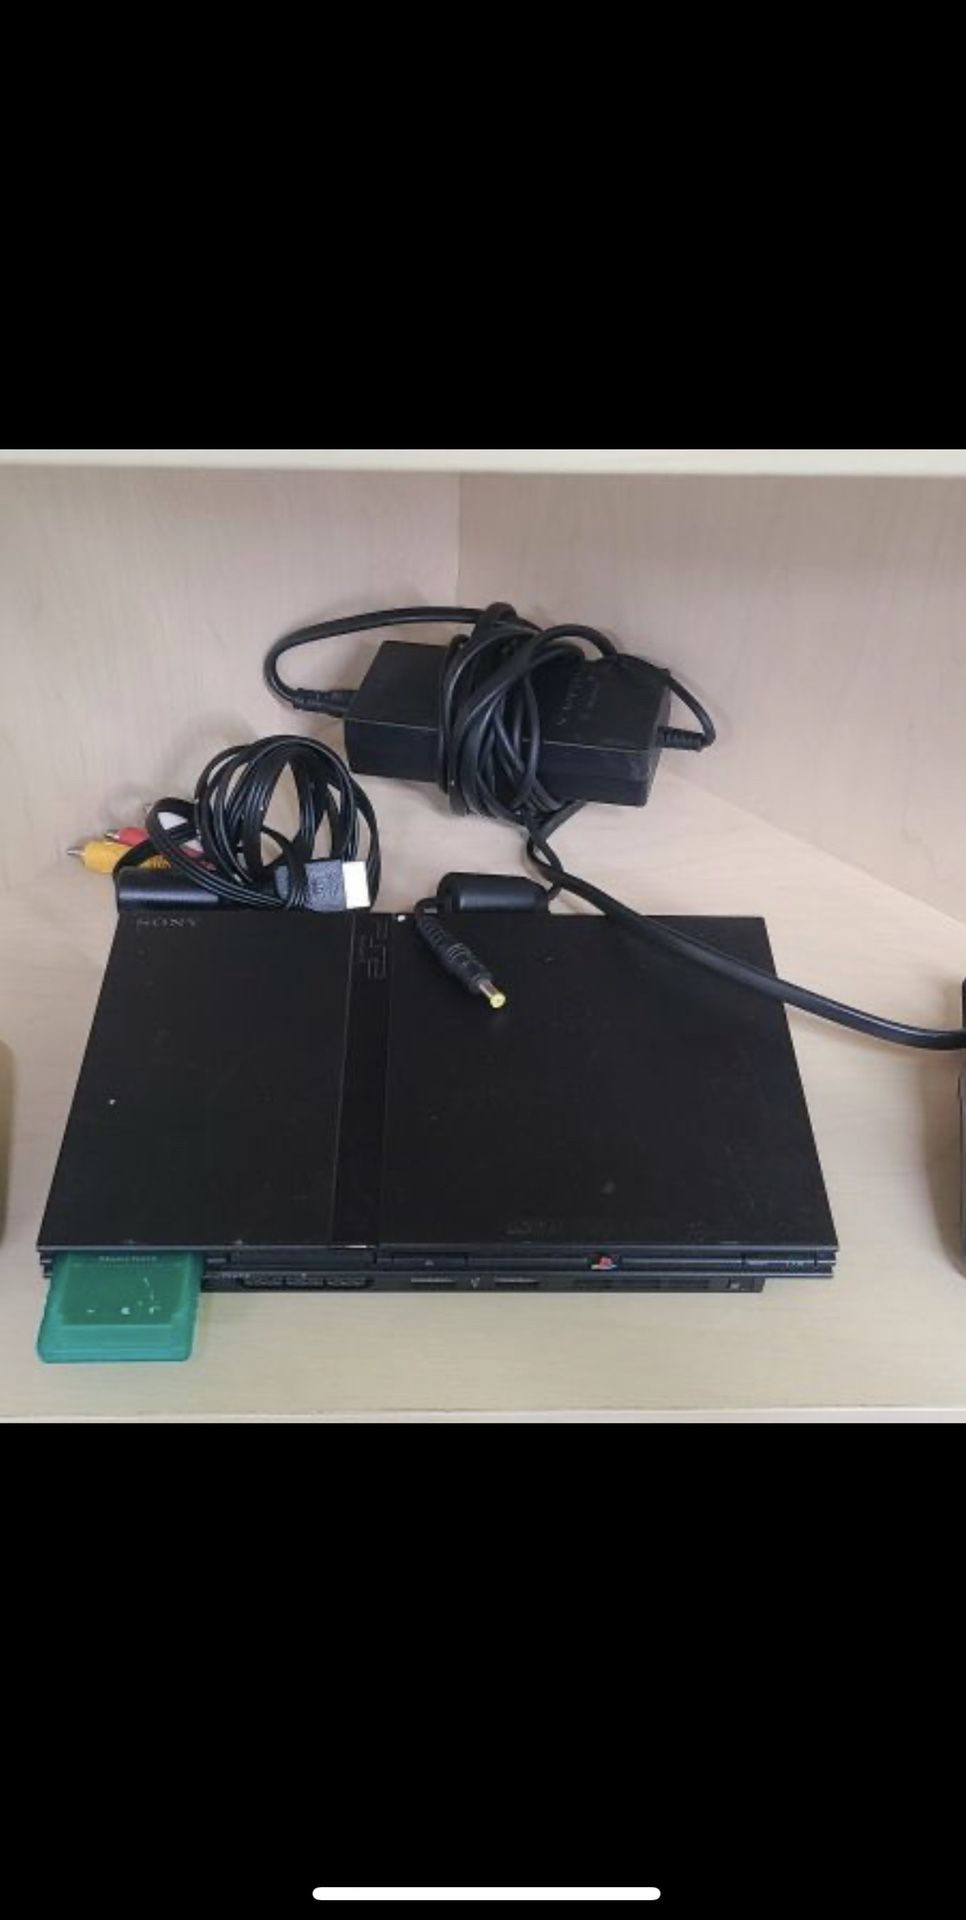 Ps2 slim for sale !! With all cables and 2 controllers